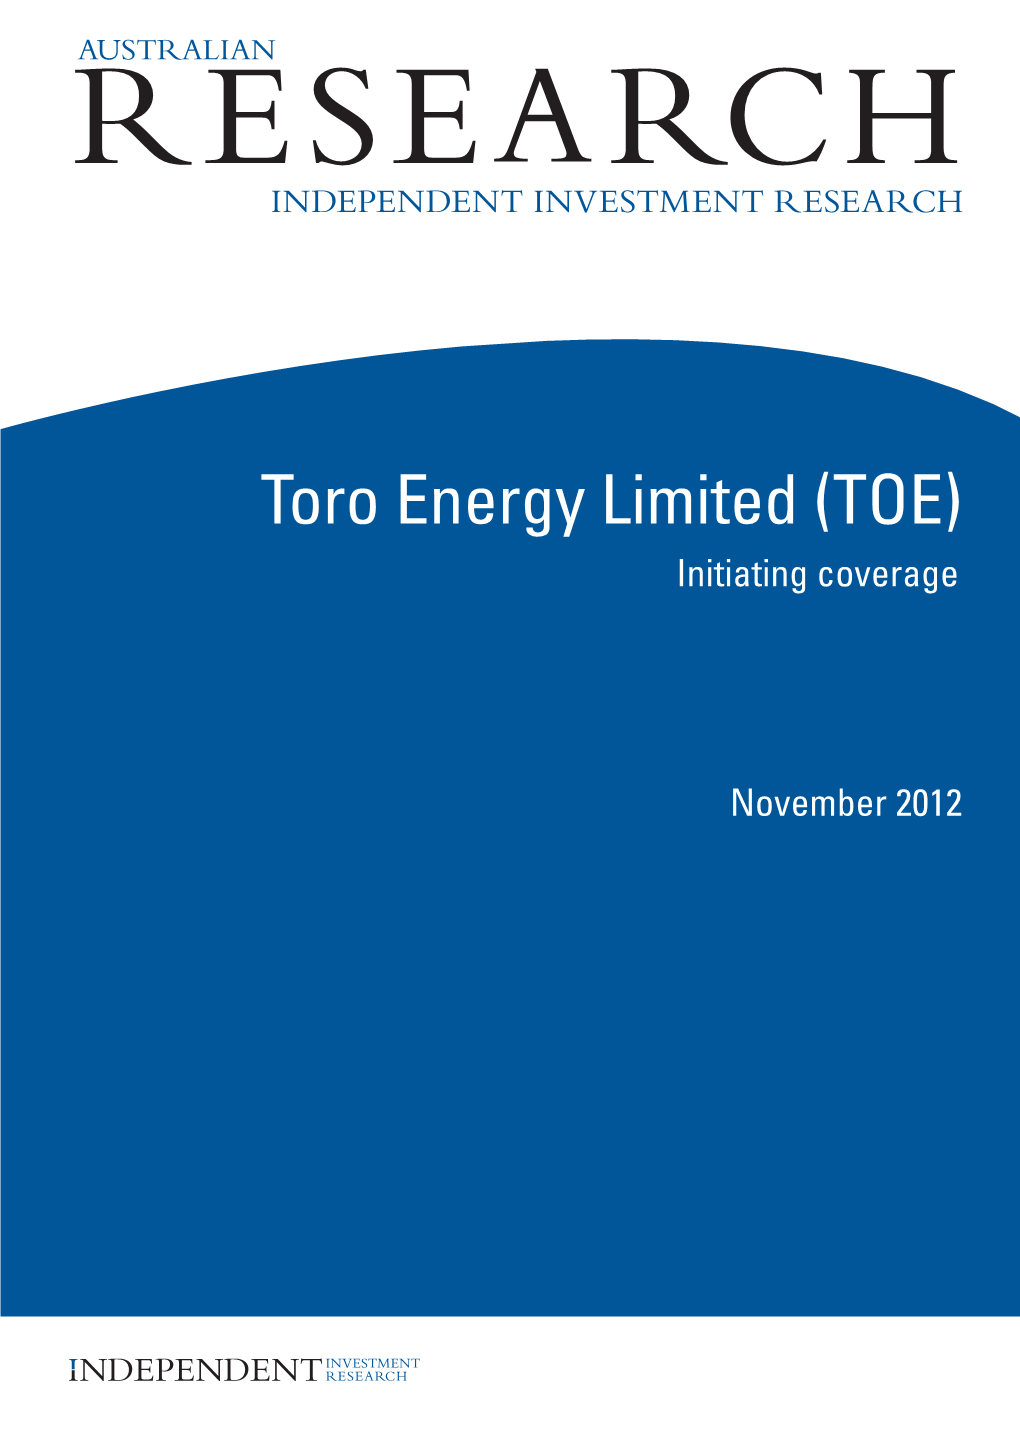 Toro Energy Limited (TOE) Initiating Coverage